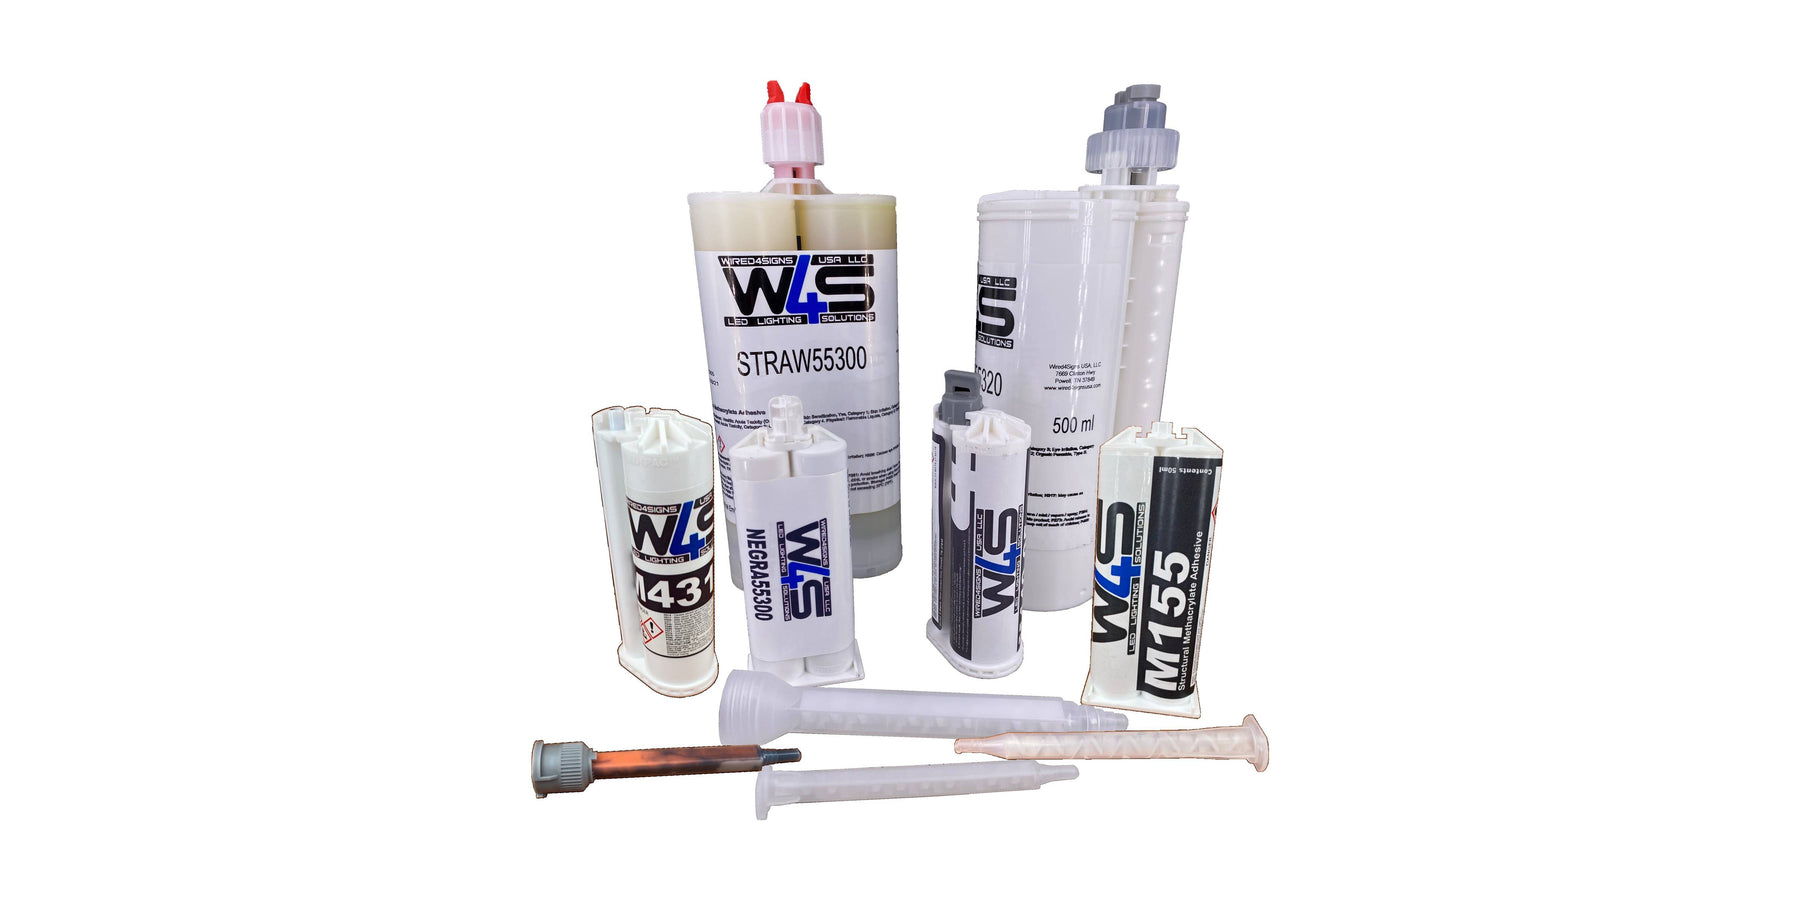 Wired4Signs range of signage-specific two-part structural adhesives